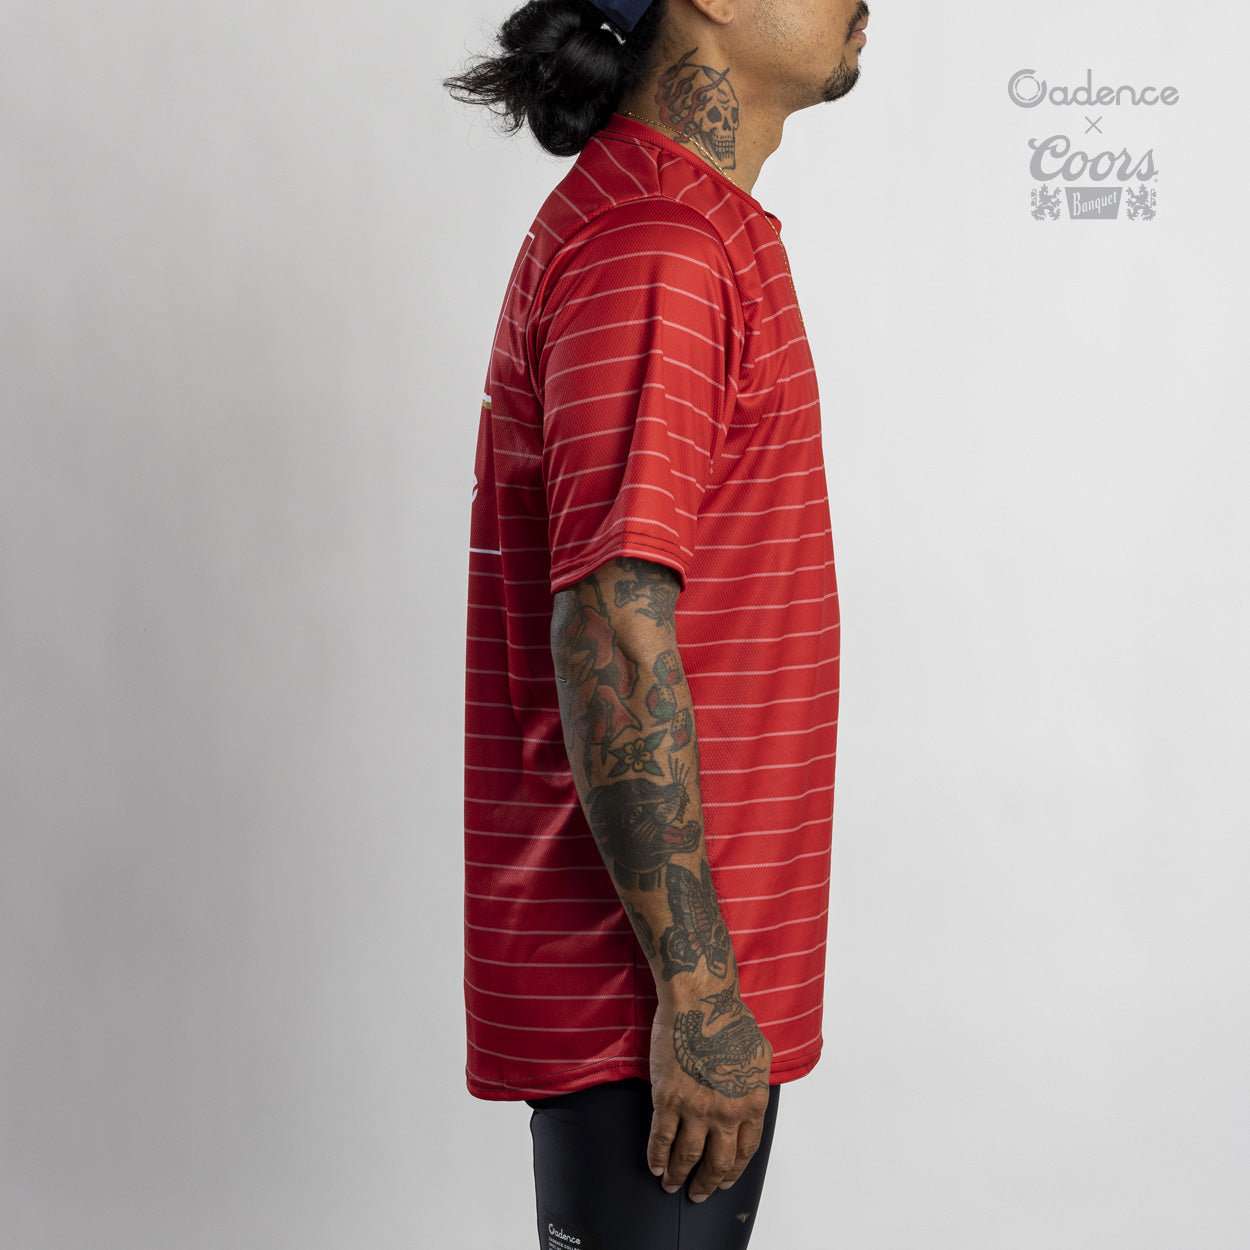 Coors Barley S/S MTB Jersey [Red]